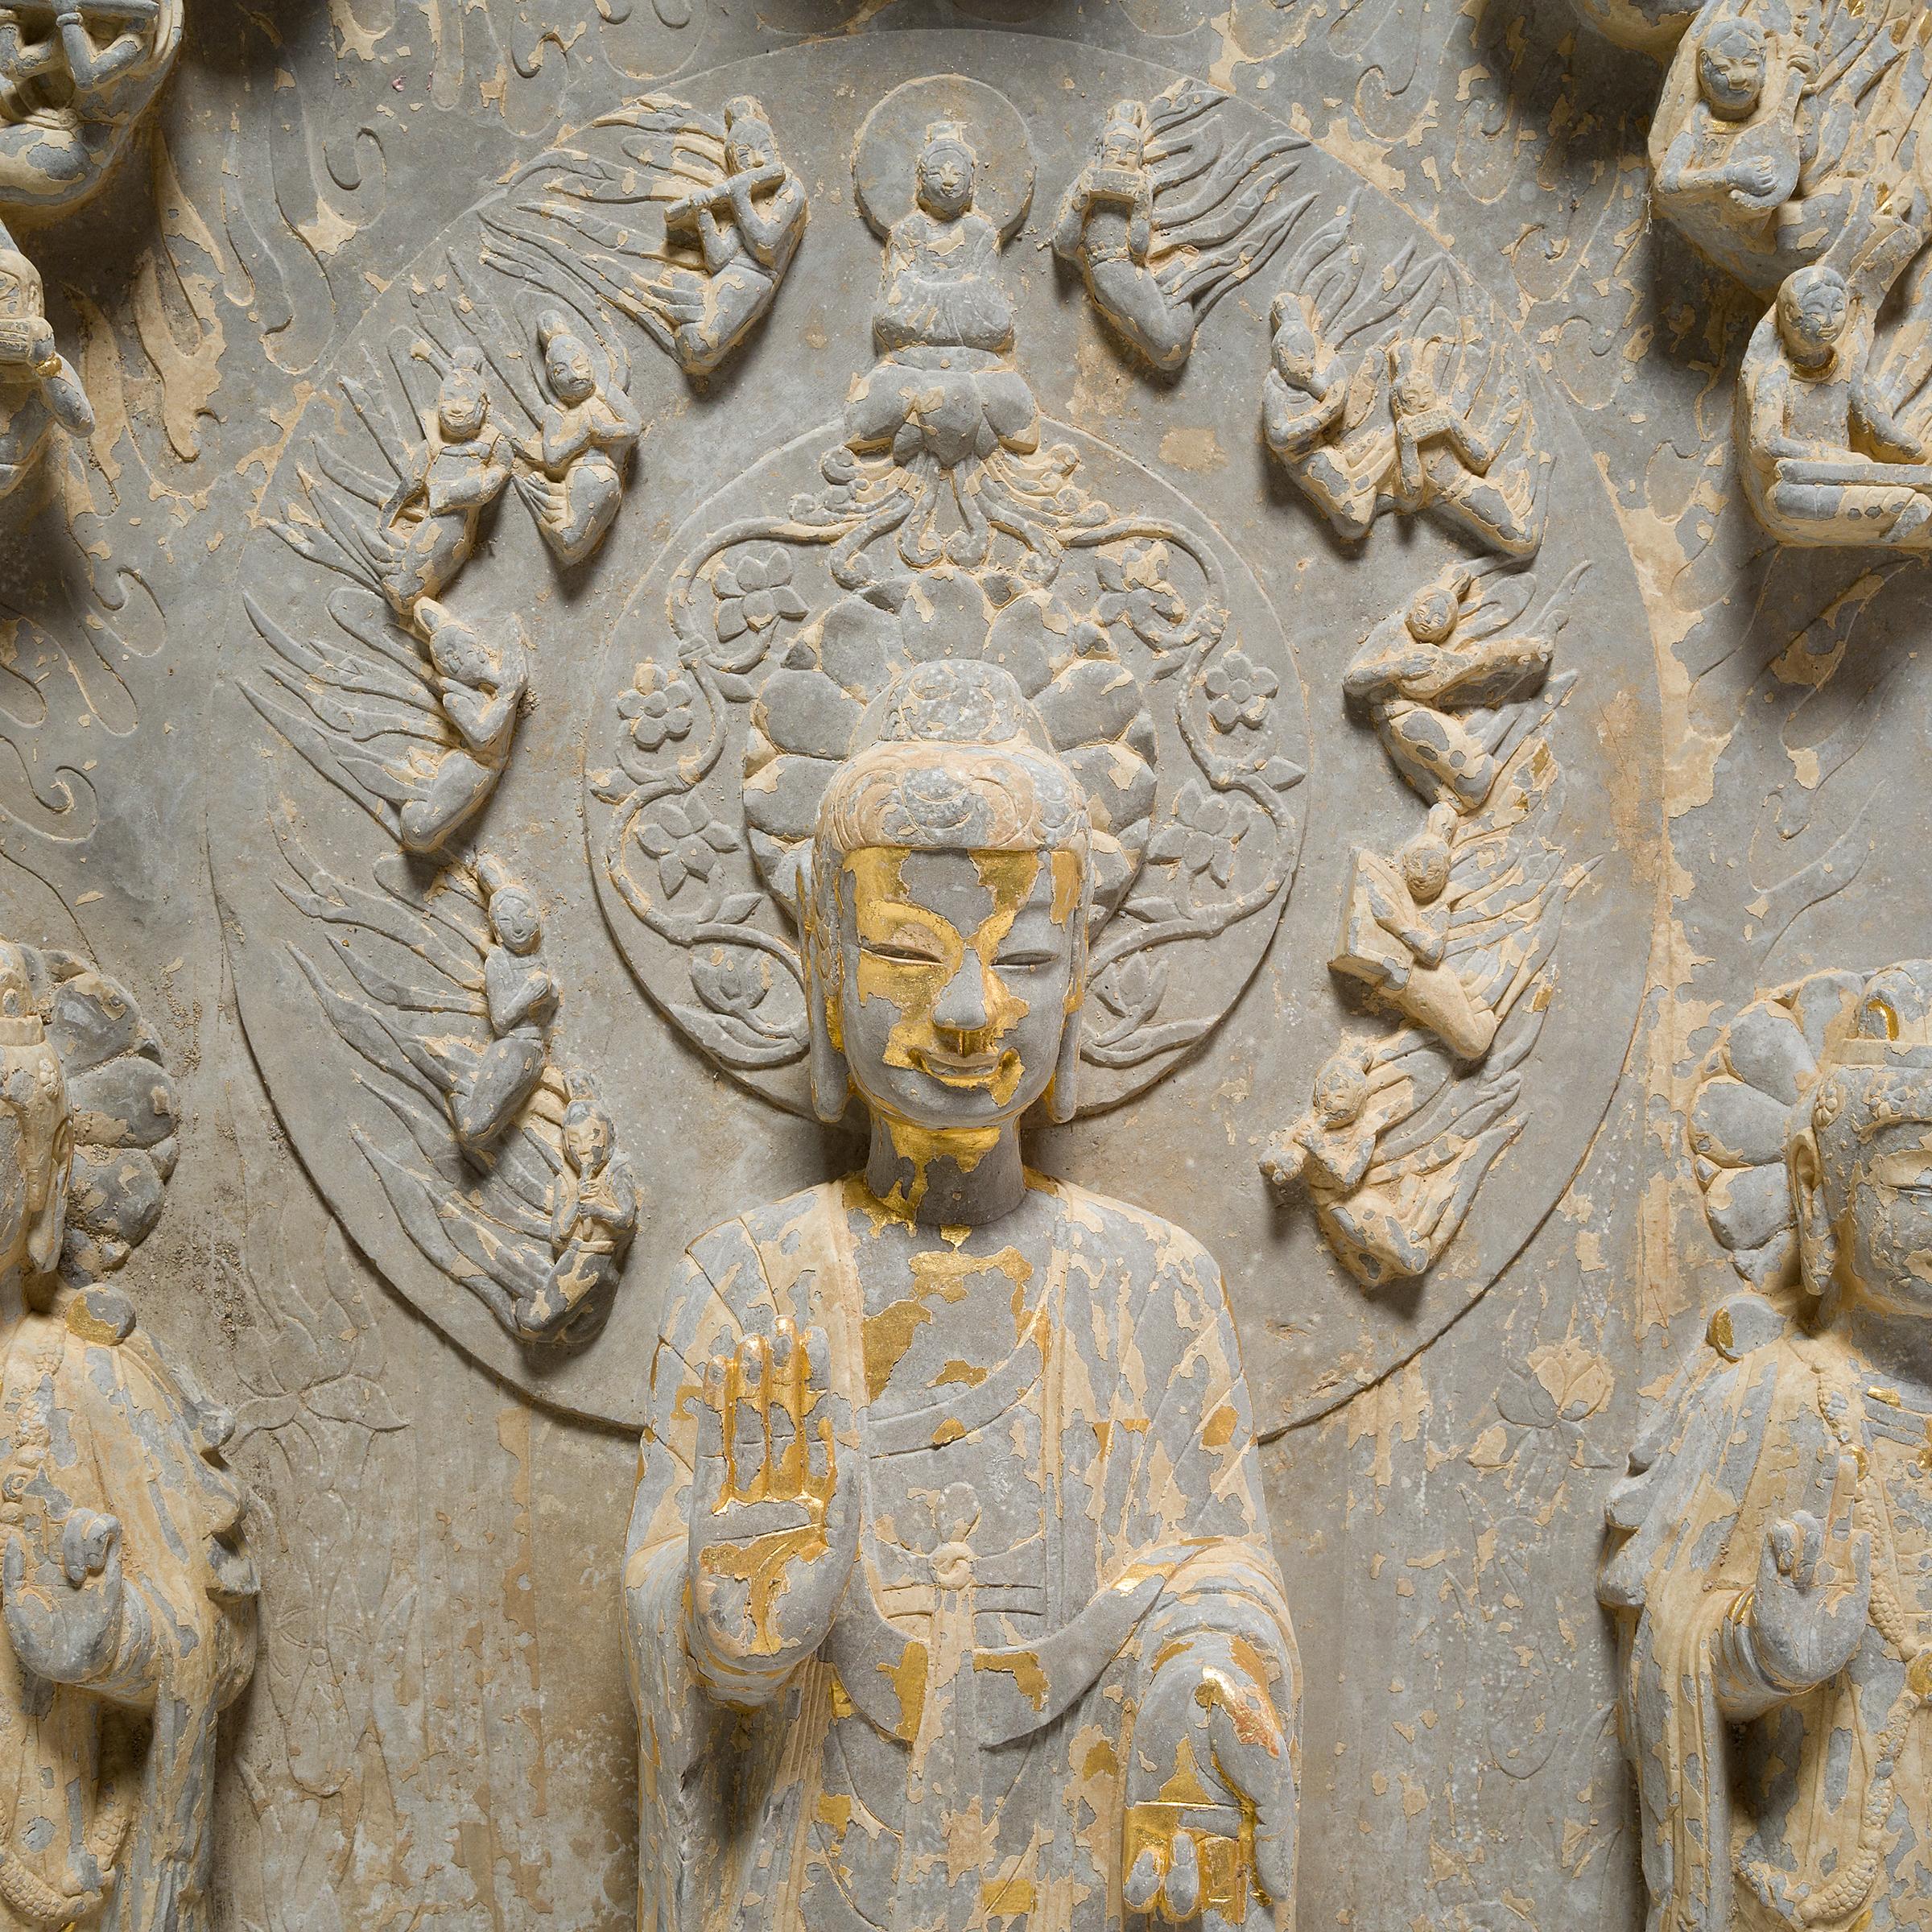 This intricate limestone stele of a standing buddha likely depicts Maitreya, the Buddha of the Future. The only Buddhist divinity revered as both a bodhisattva and a Buddha, Maitreya is prophesied to return to Earth some time in the distant future